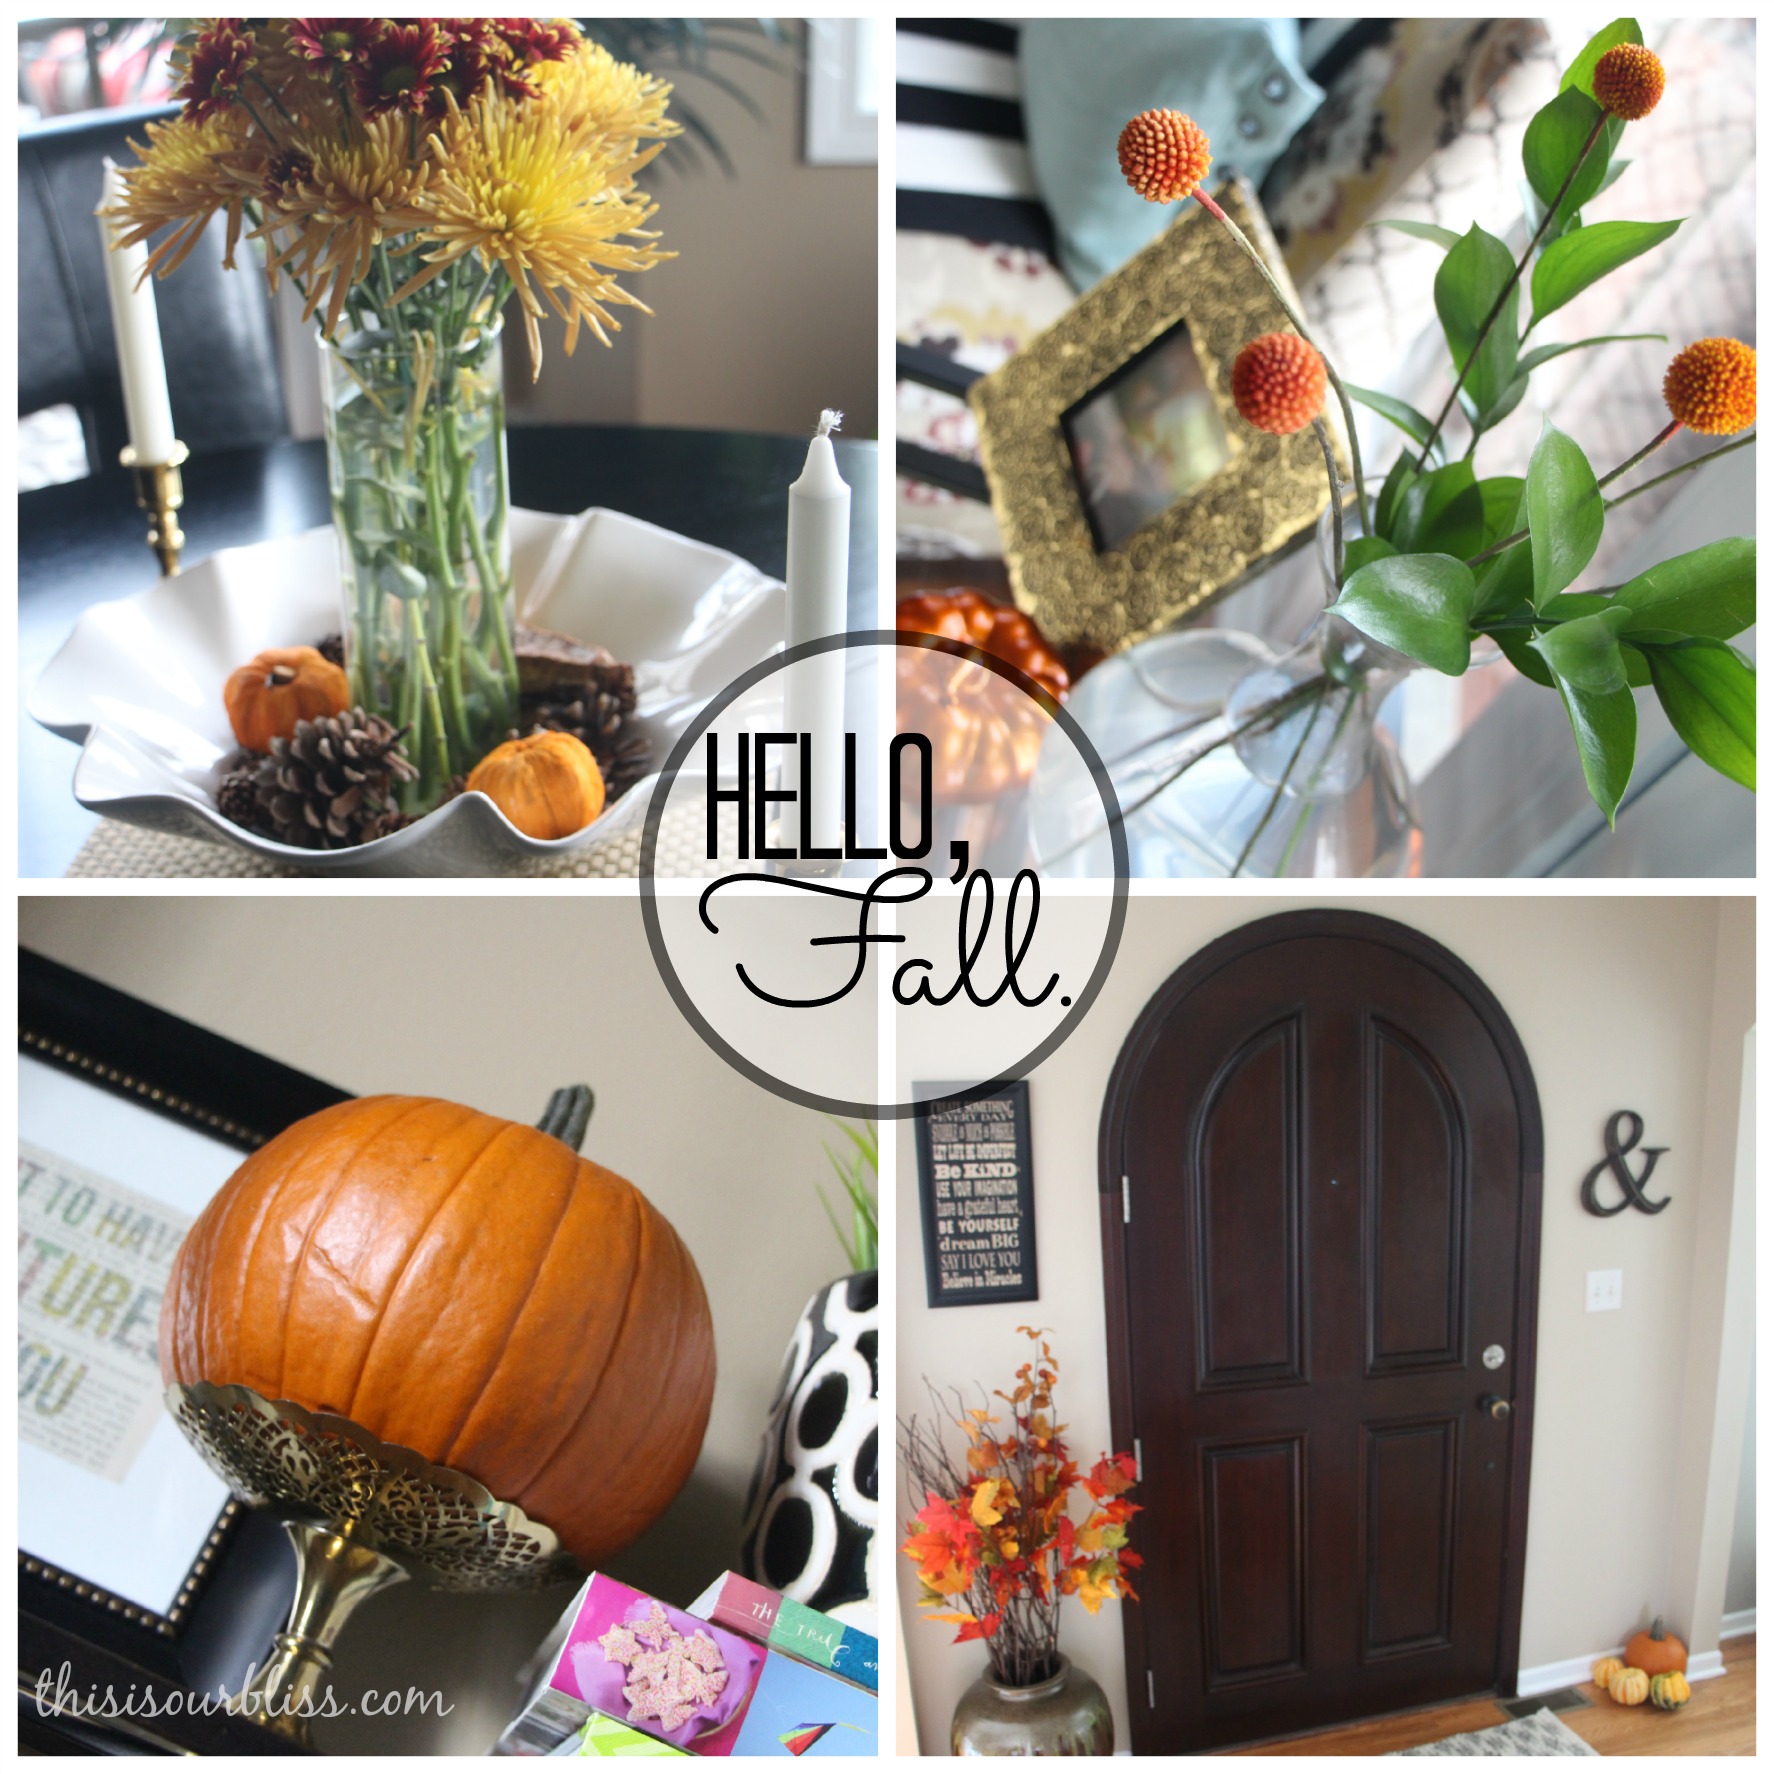 A few simple fall decor touches around the house